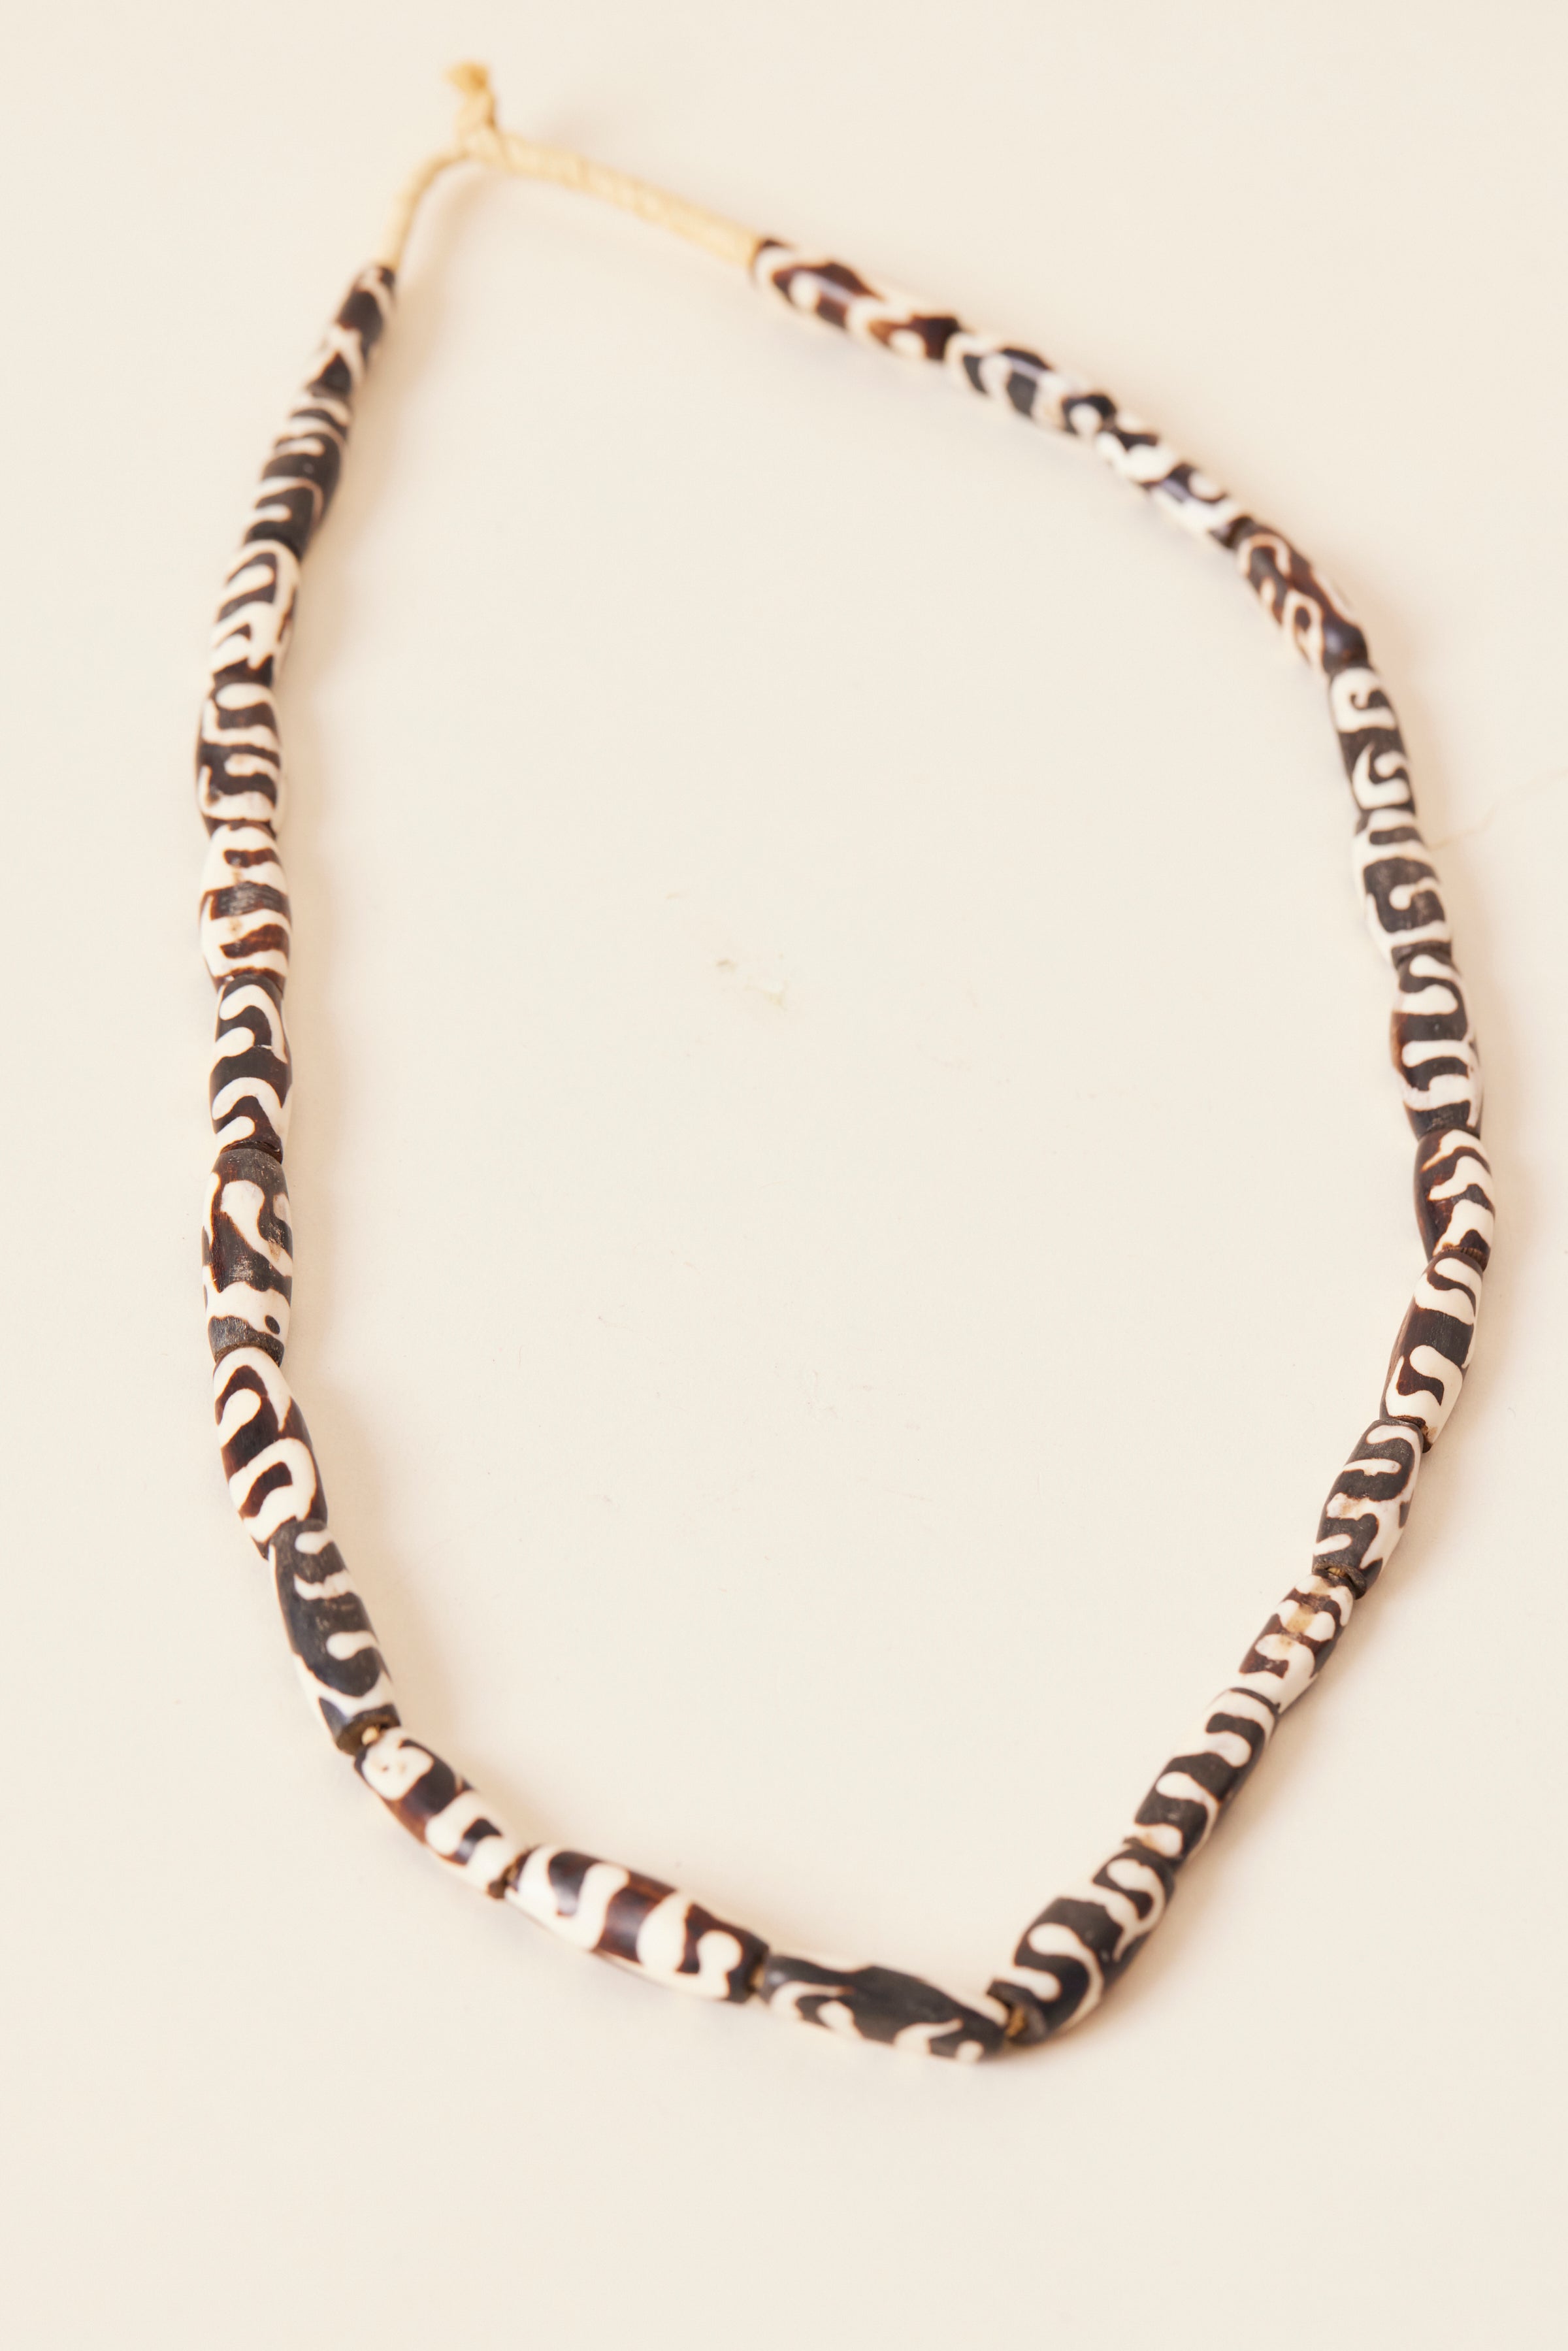 Double Strand Bone and Wood Bead Necklace - Ruby Lane